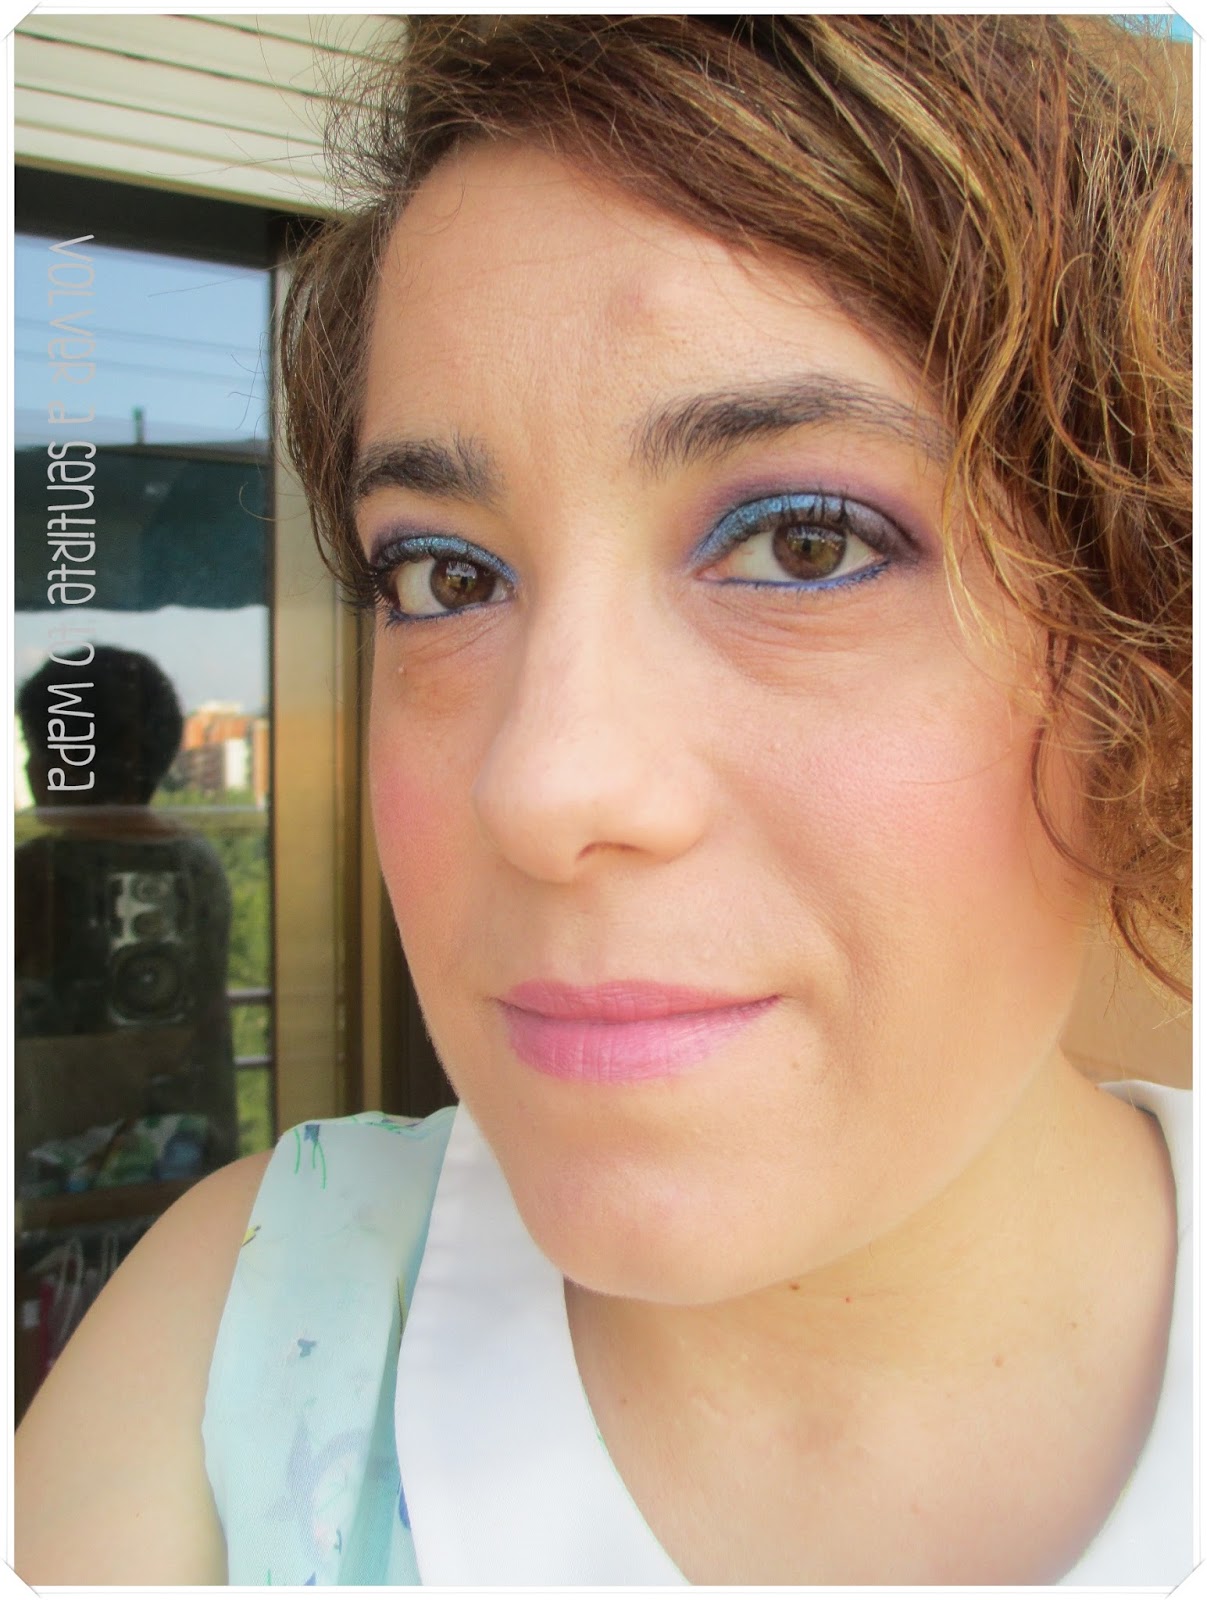 Maquillaje con productos low cost - Volver a Sentirte to Wapa